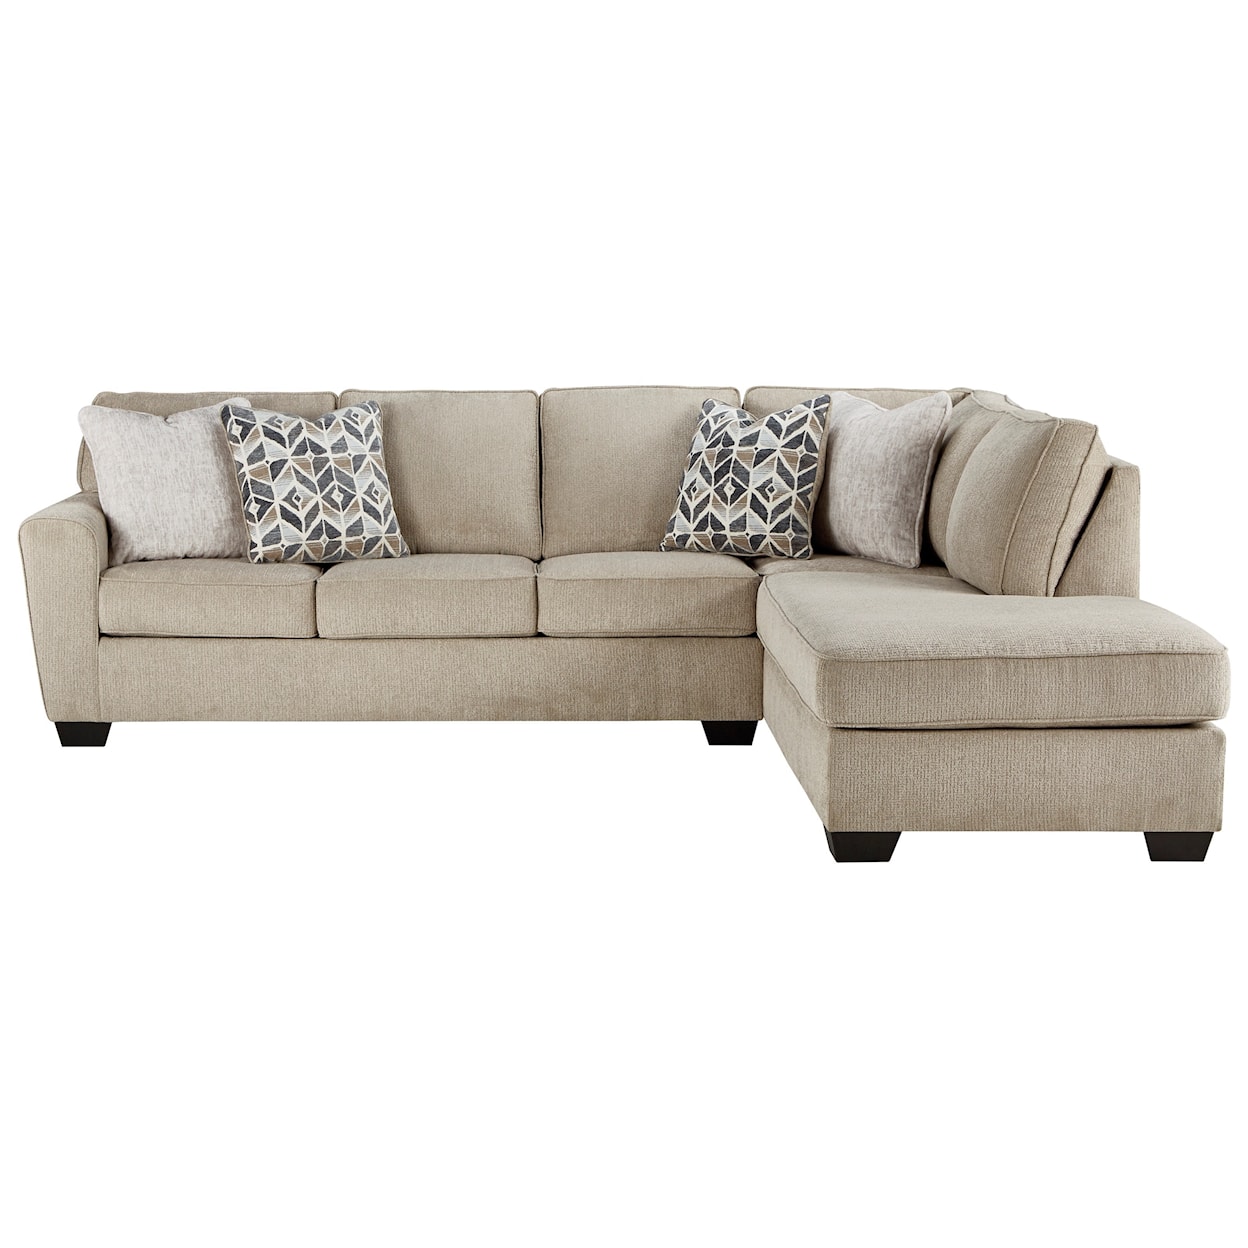 StyleLine Decelle 2-Piece Sectional with Chaise